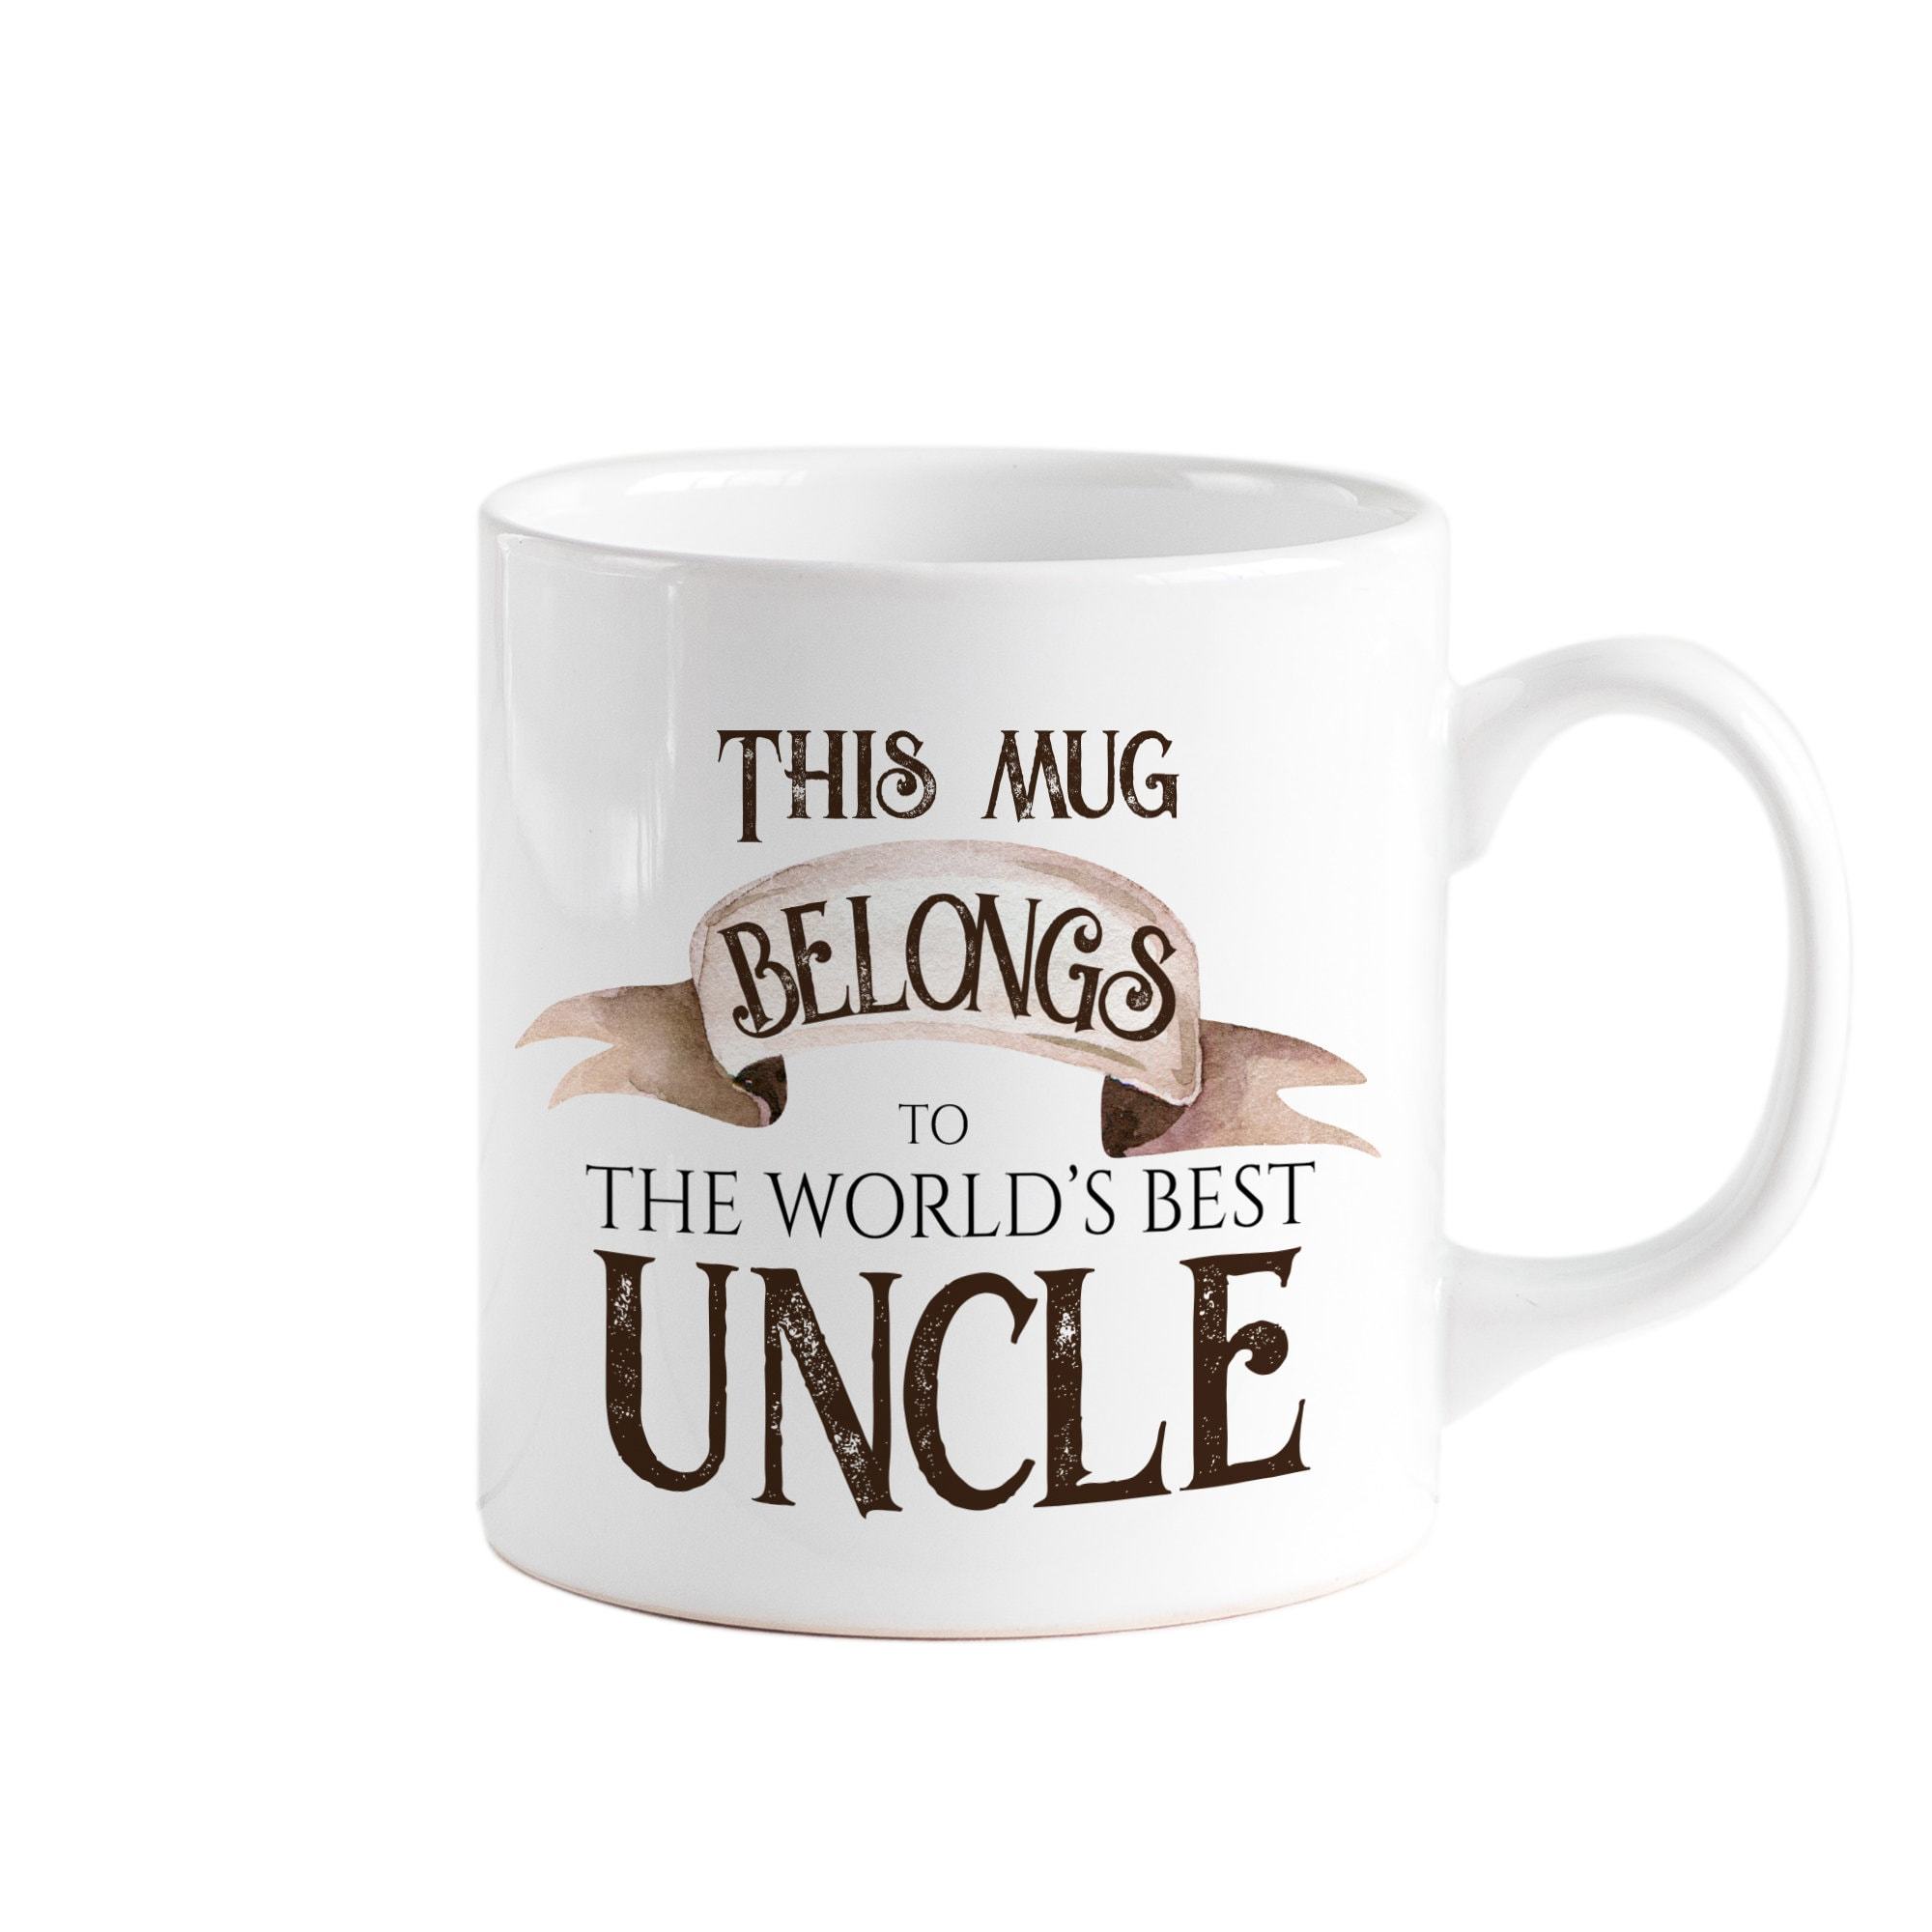 This mug belongs to the world's best grandad, Father's Day gift, Christmas gift for grandpa, grandad present, Best Ever